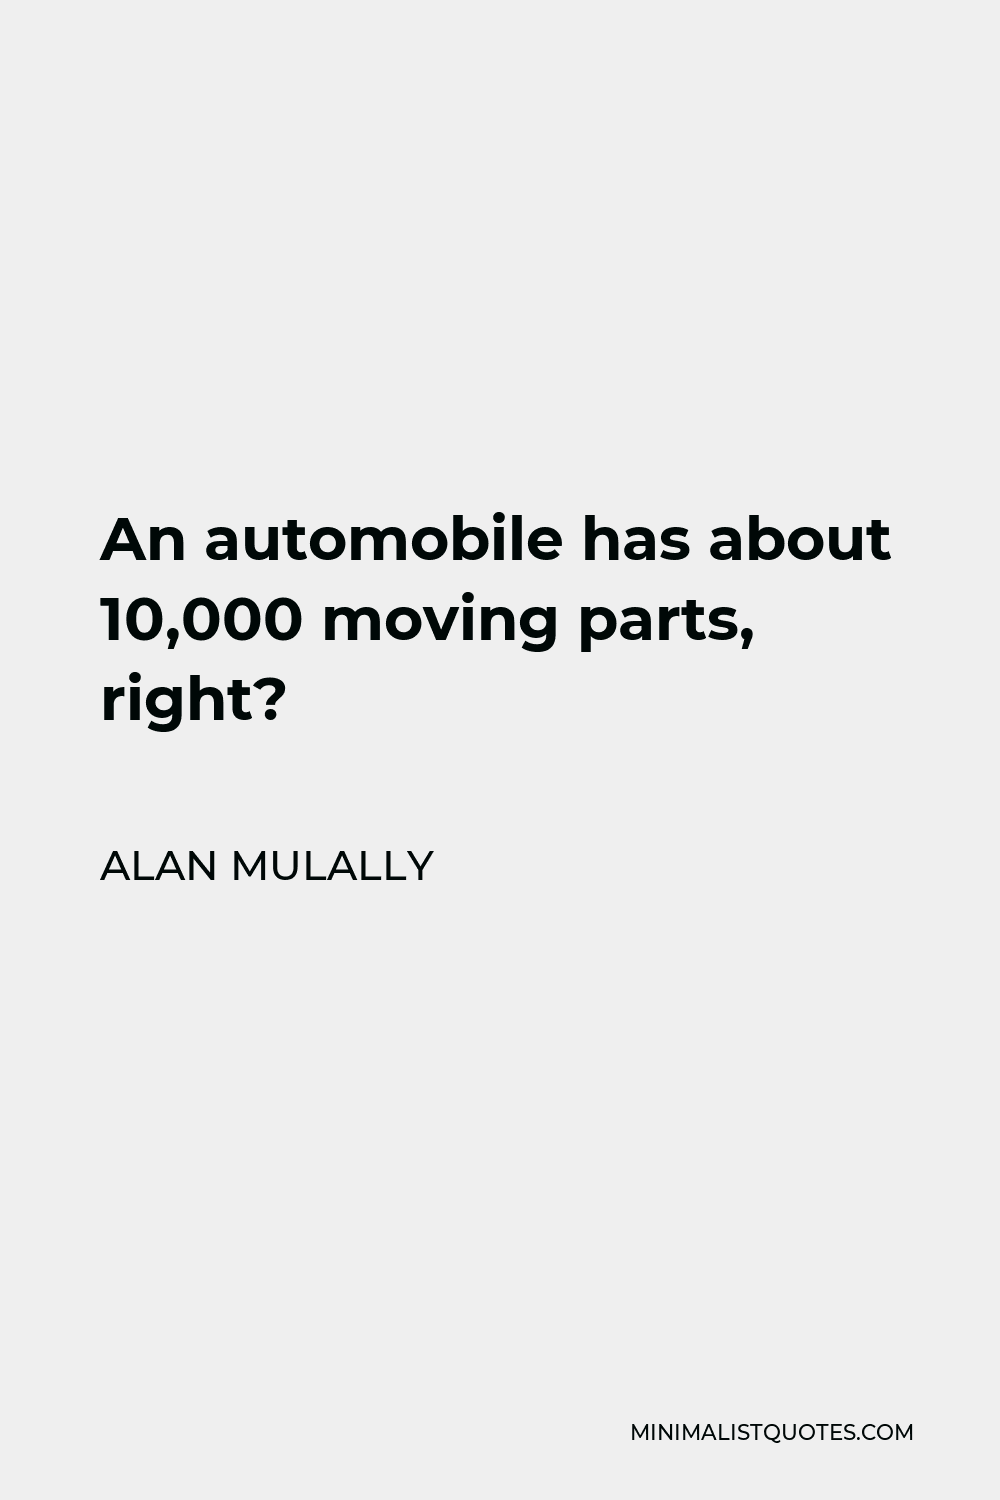 Alan Mulally Quote - An automobile has about 10,000 moving parts, right?